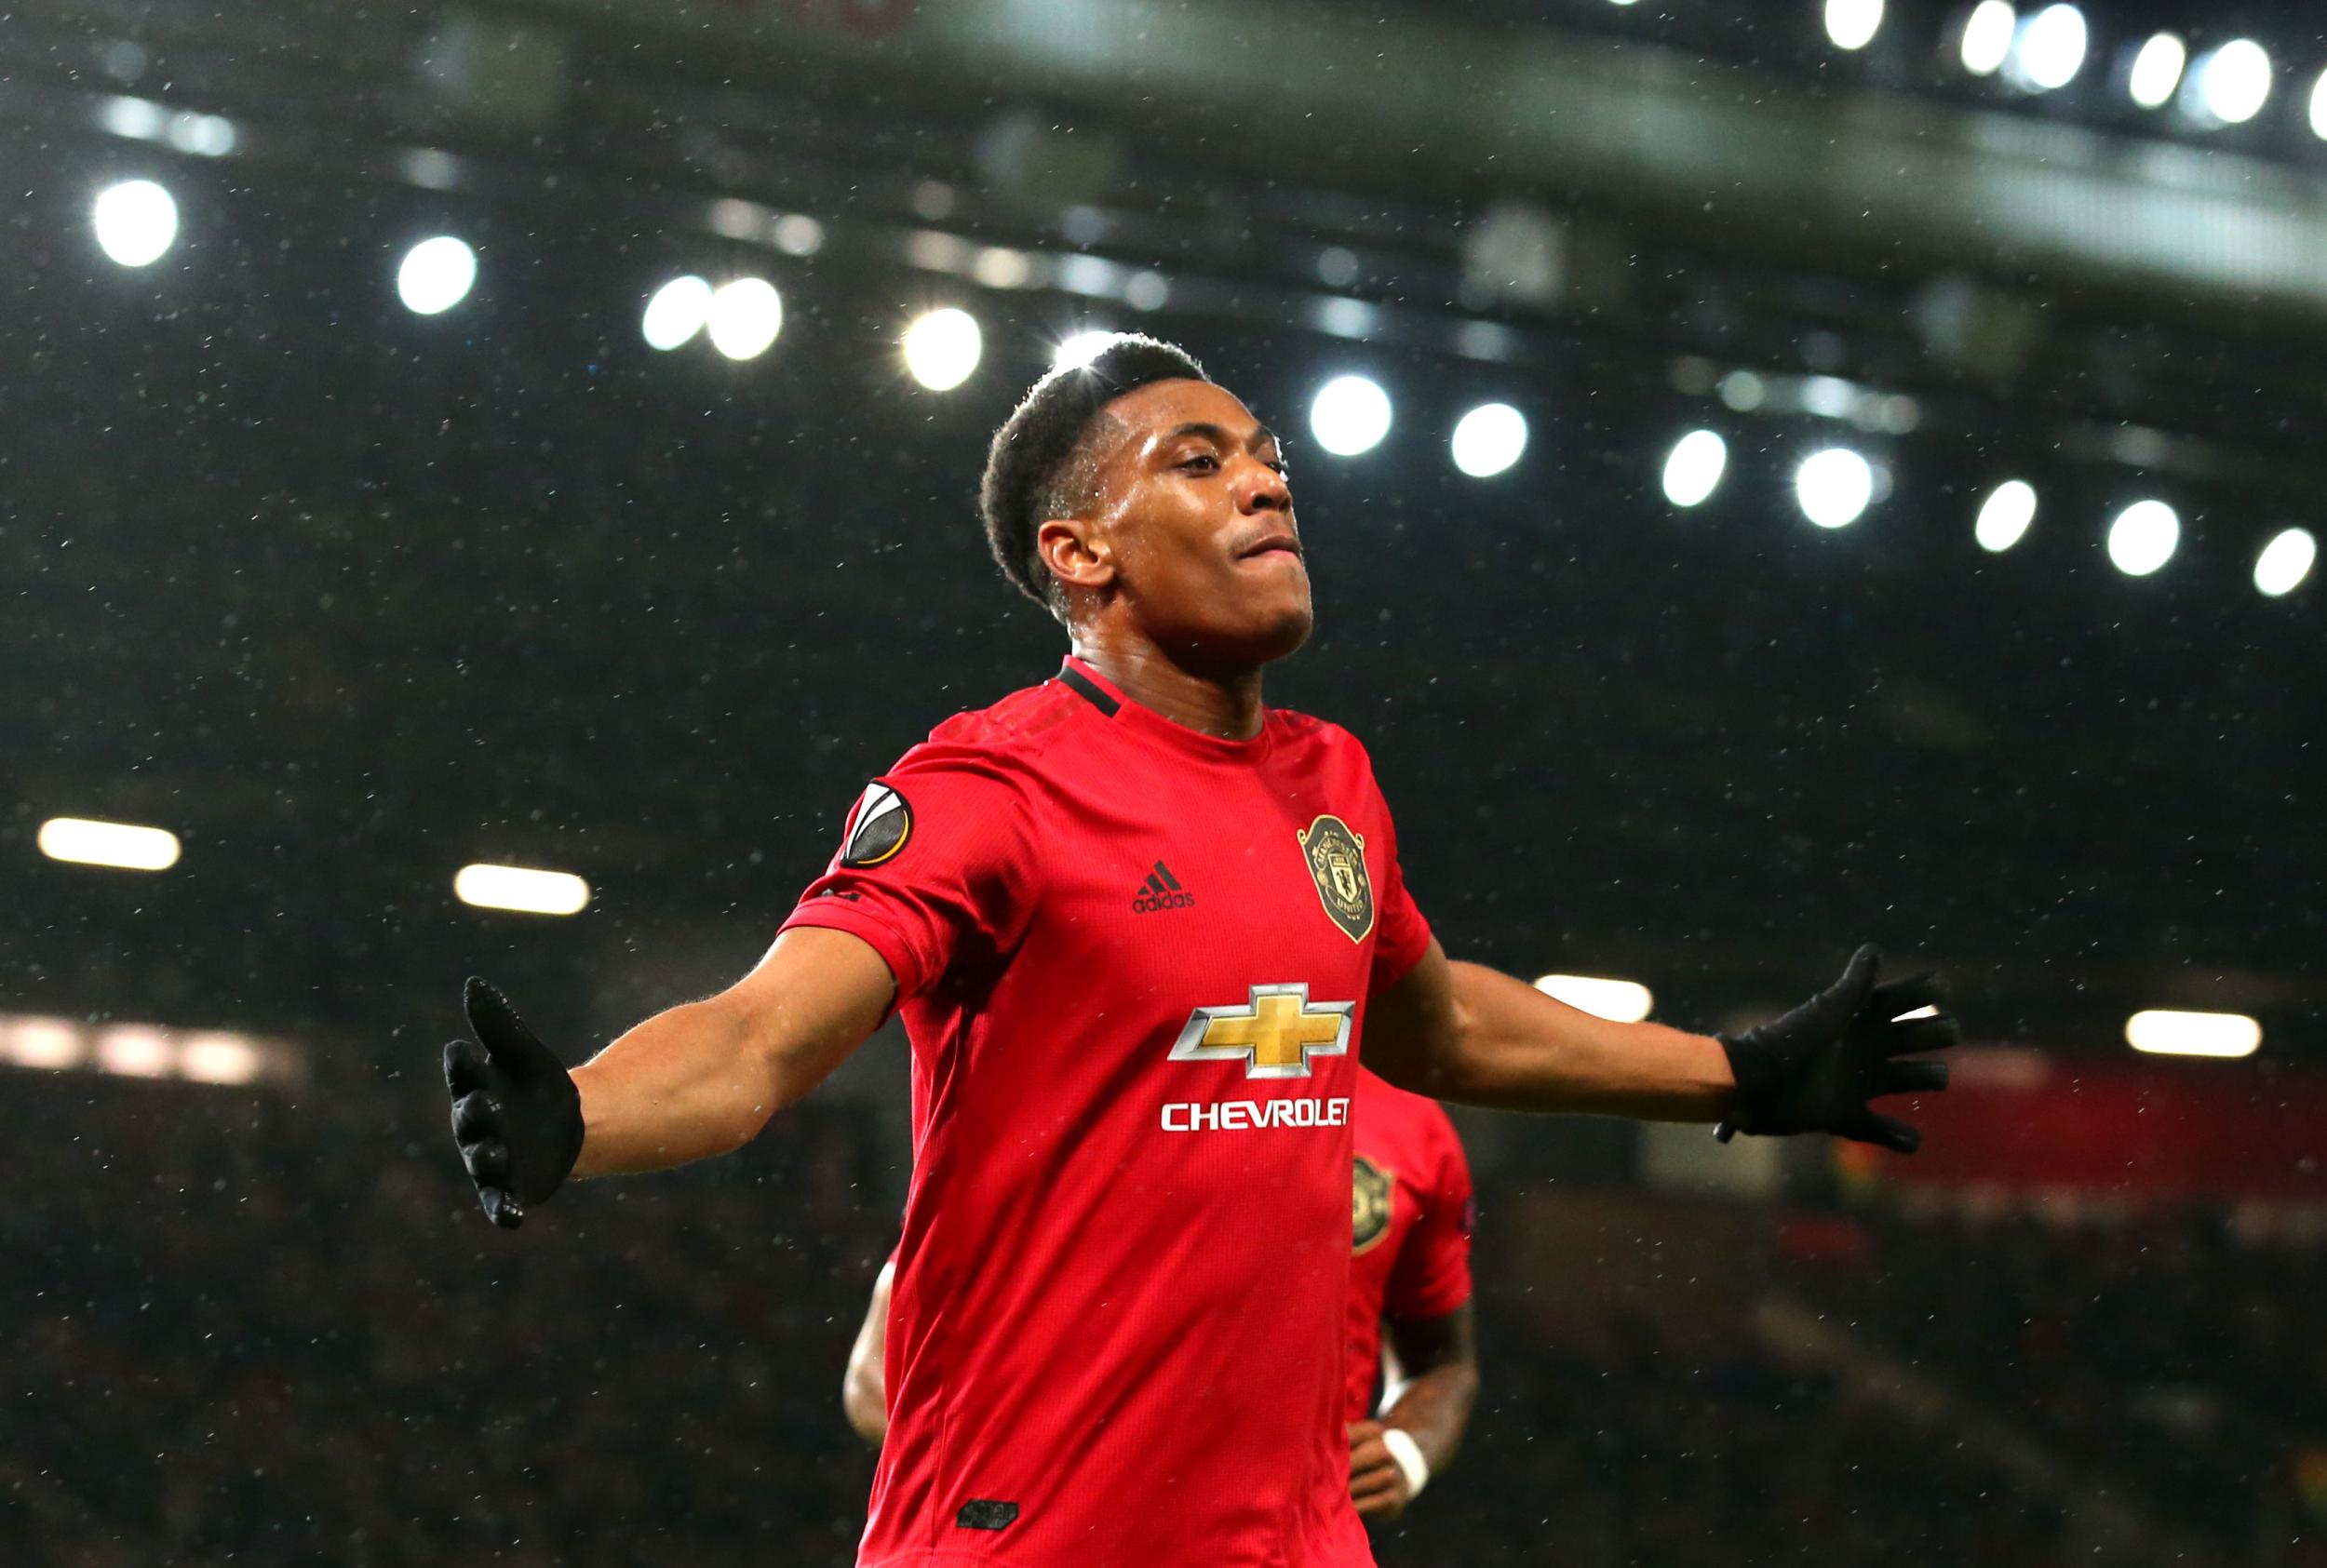 Anthony Martial’s solo effort was the highlight in a convincing Manchester United win